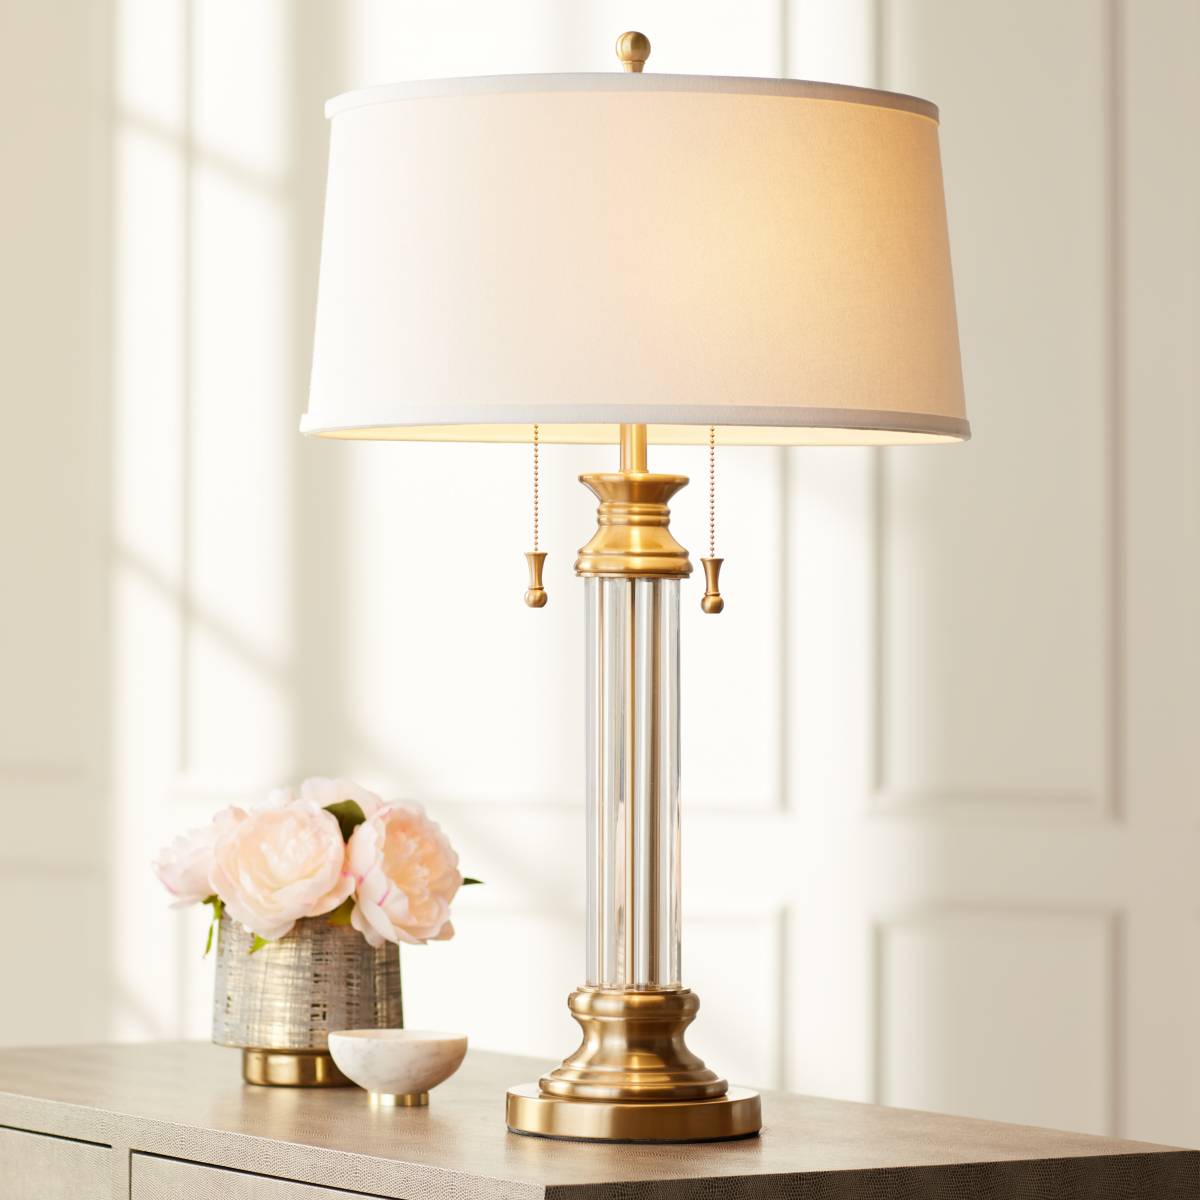 Pull Chain Table Lamps Plus, Small Table Lamp With Pull Chain